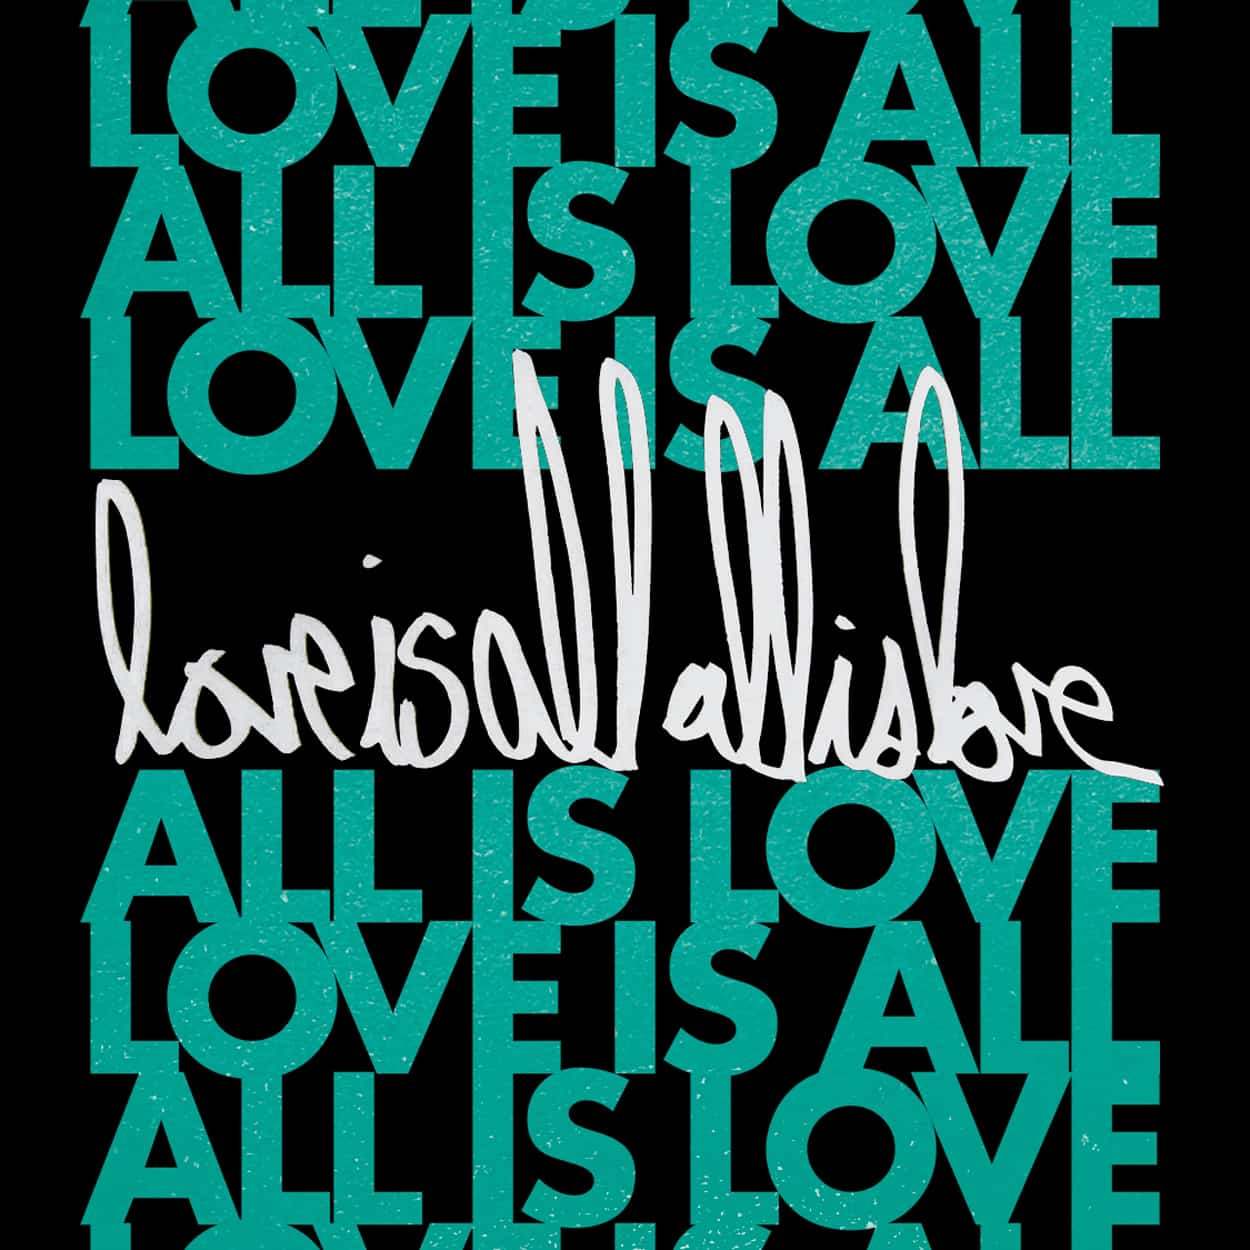 love is all, all is love - sticker design